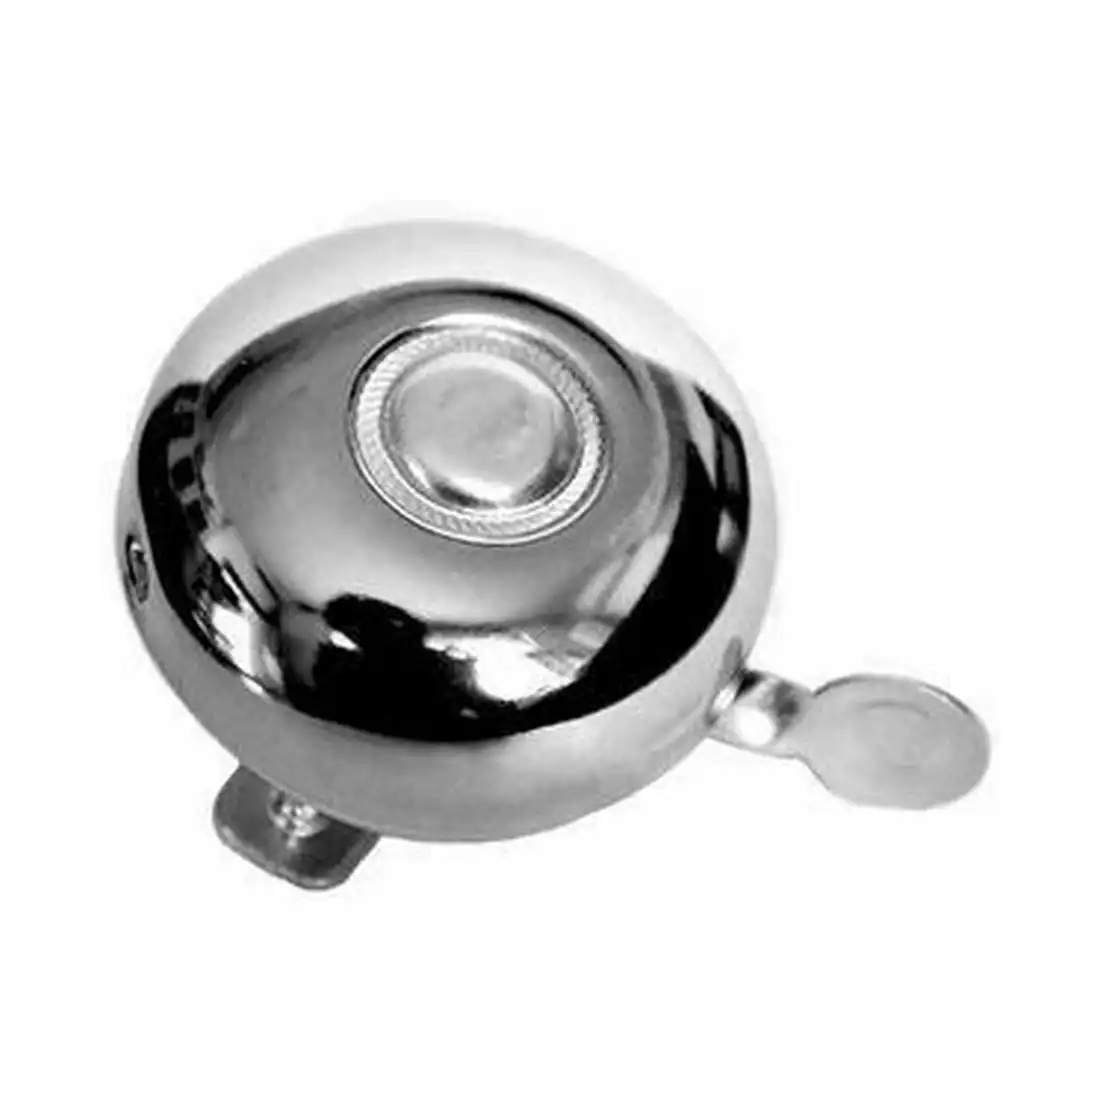 Bicycle bell, silver